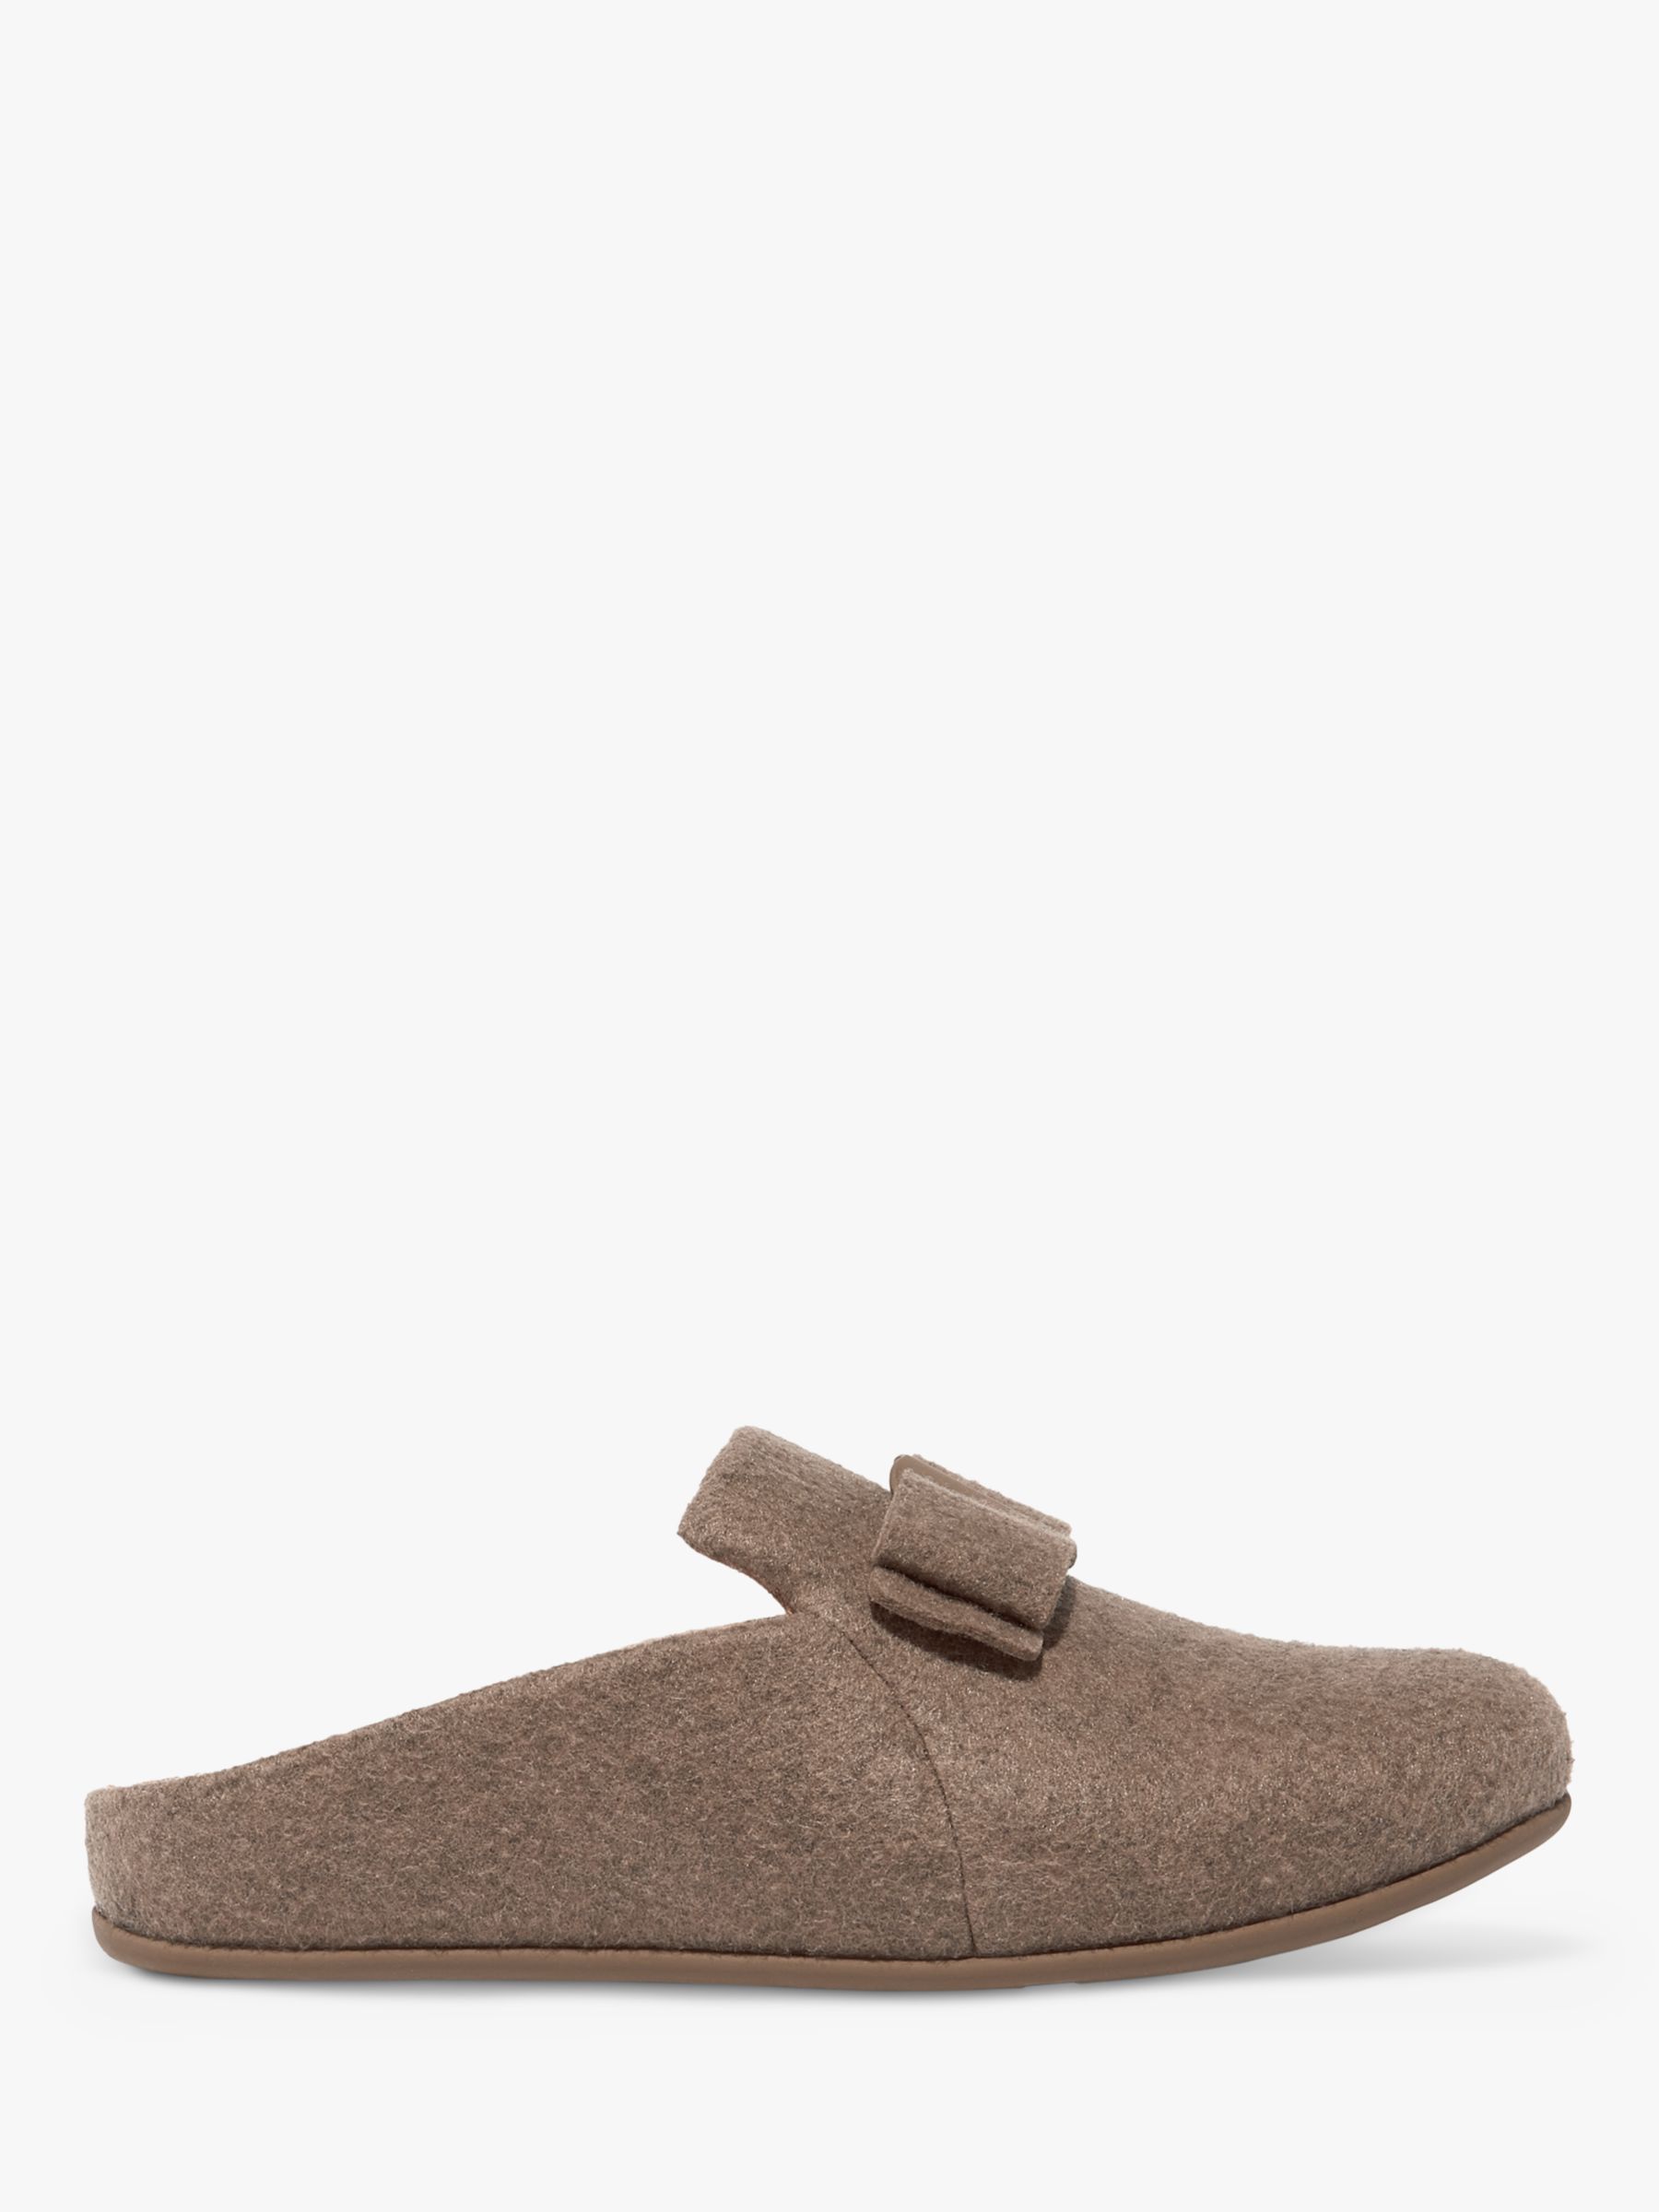 FitFlop Bow Mule Slippers, Minky Grey at John Lewis & Partners